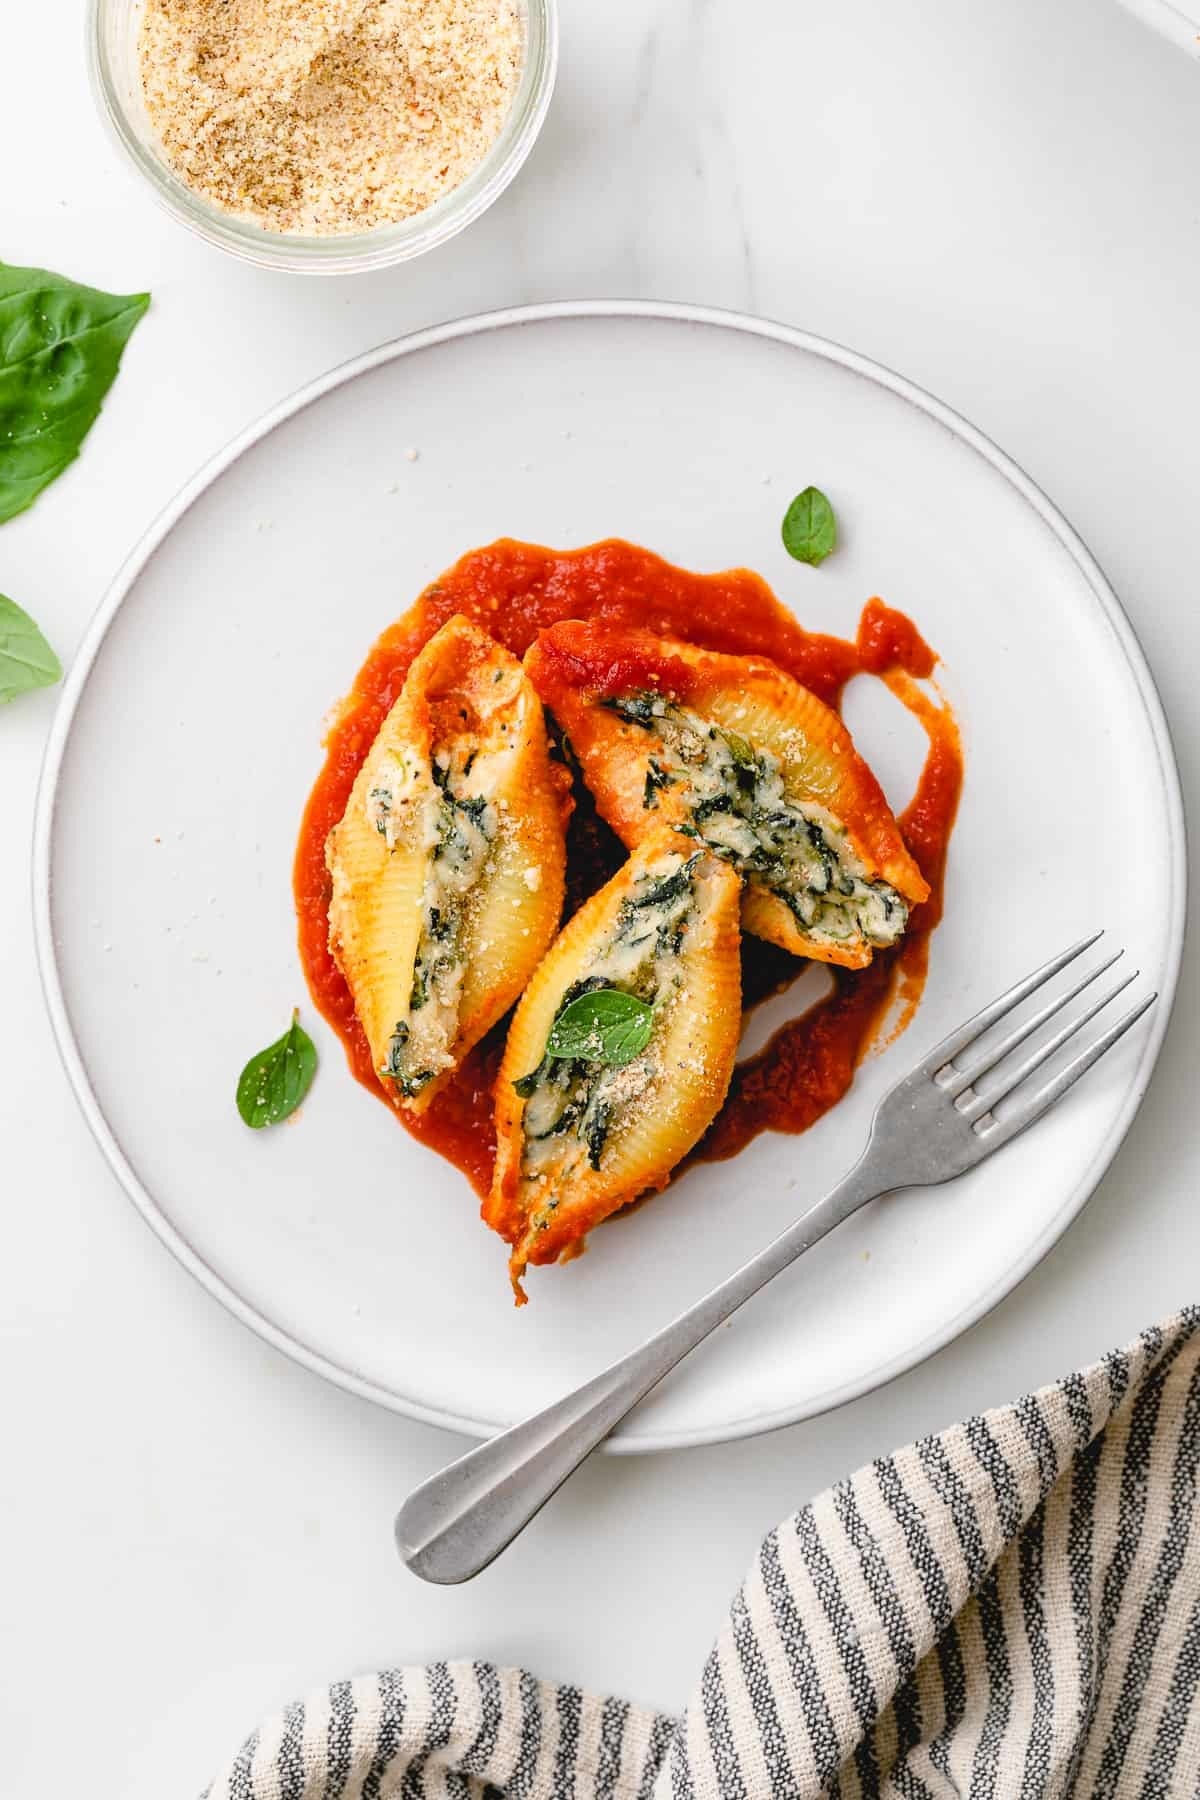 Pasta shells stuffed with spinach and cheese.